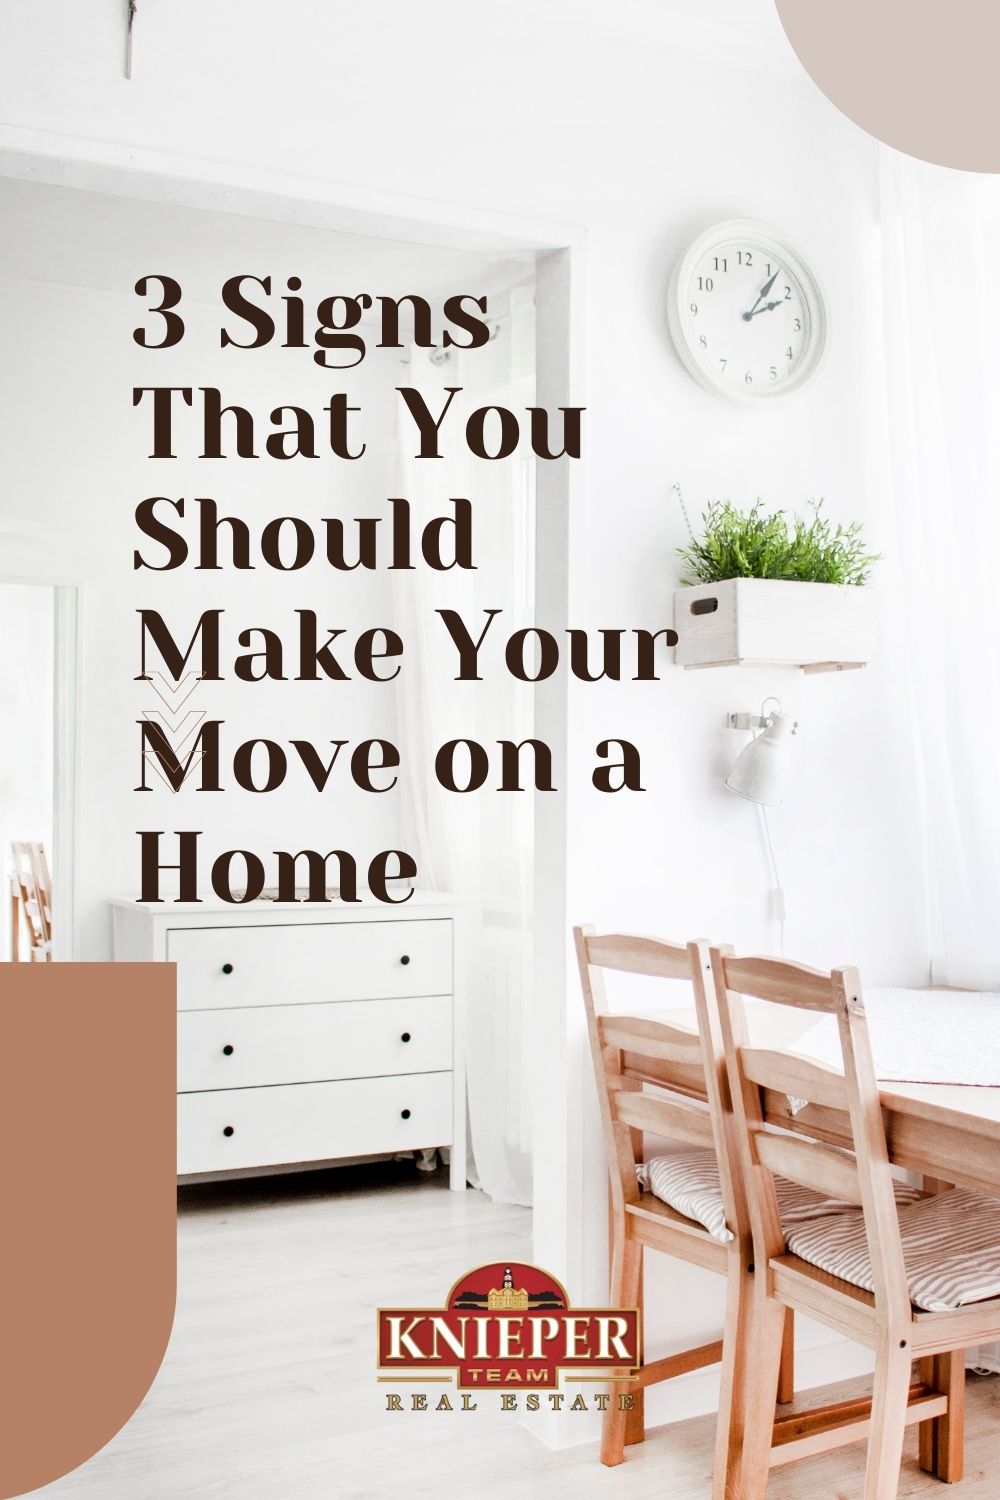 3 Signs That You Should Make Your Move on a Home